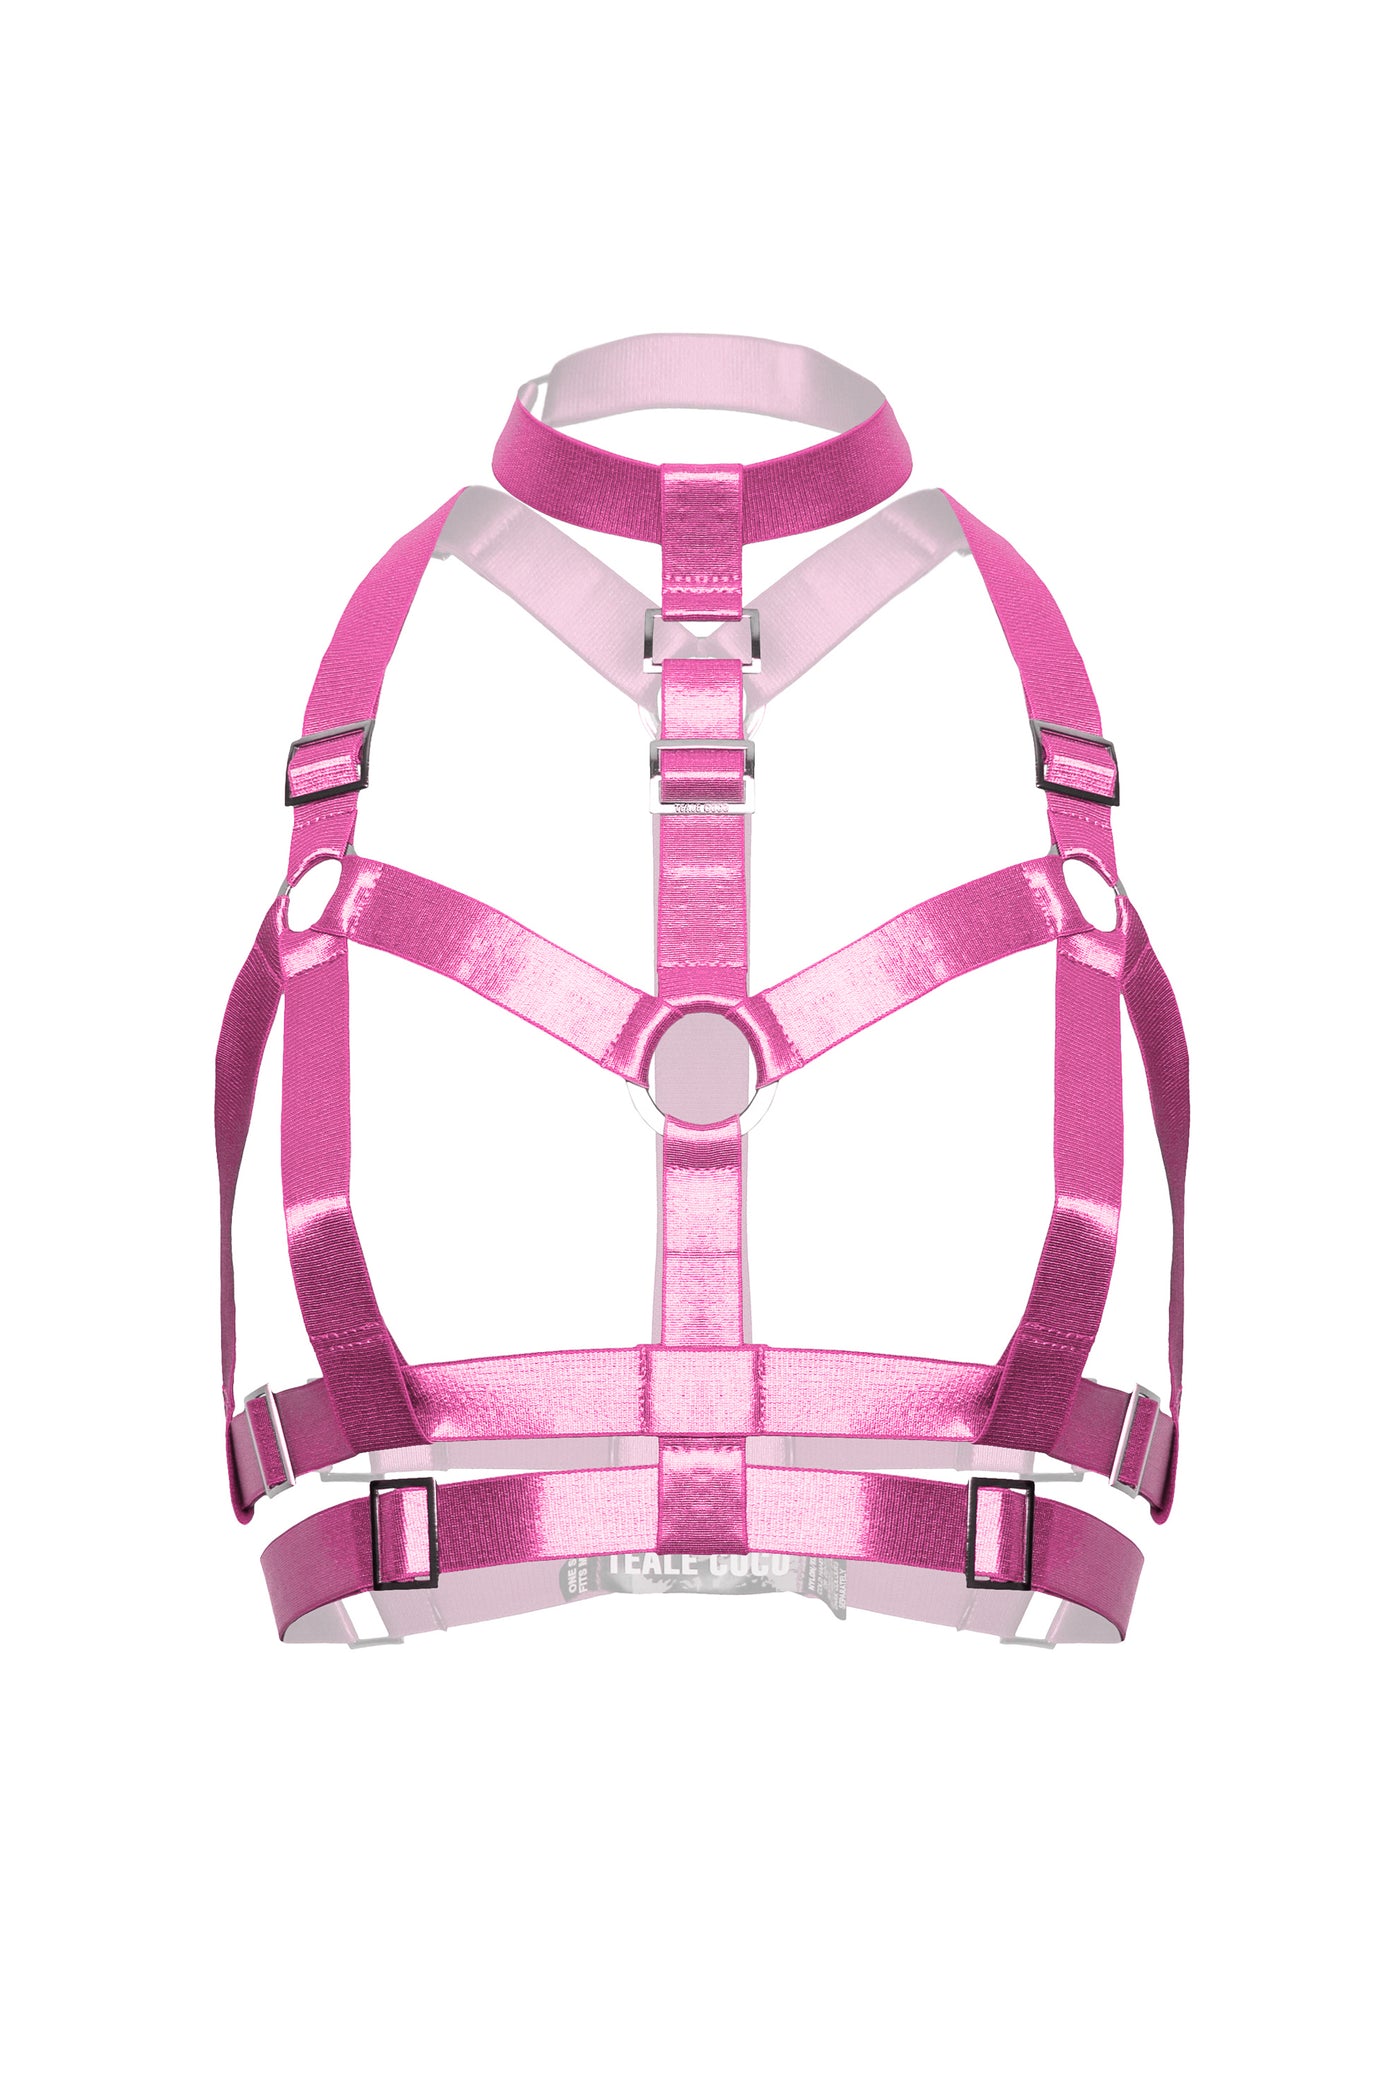 Collar Harness - Candy Pink